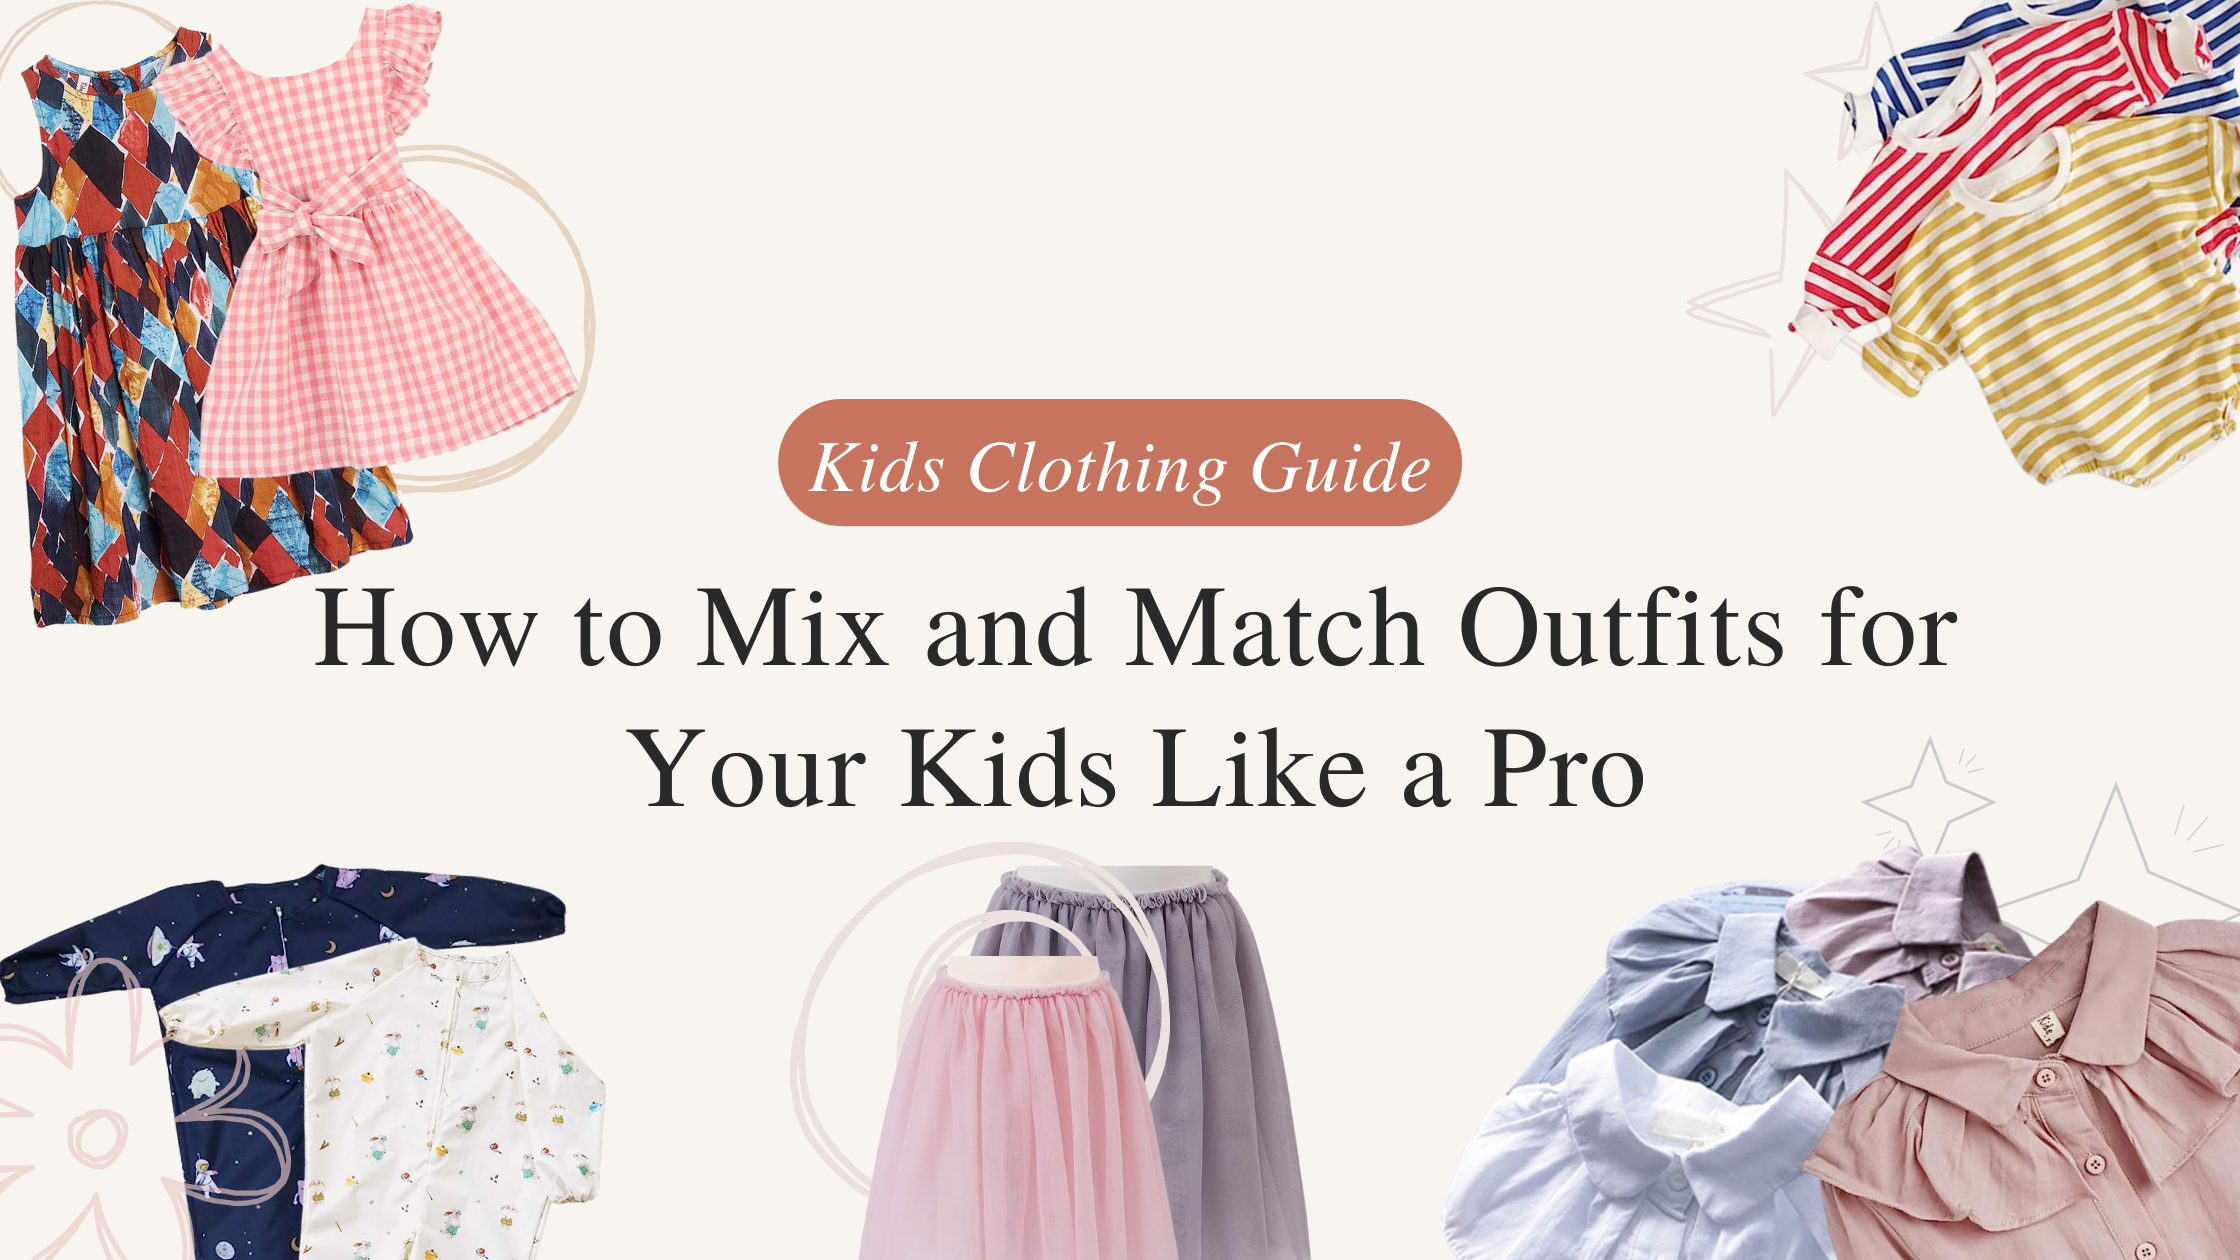 How to Mix and Match Outfits for Your Kids Like a Pro